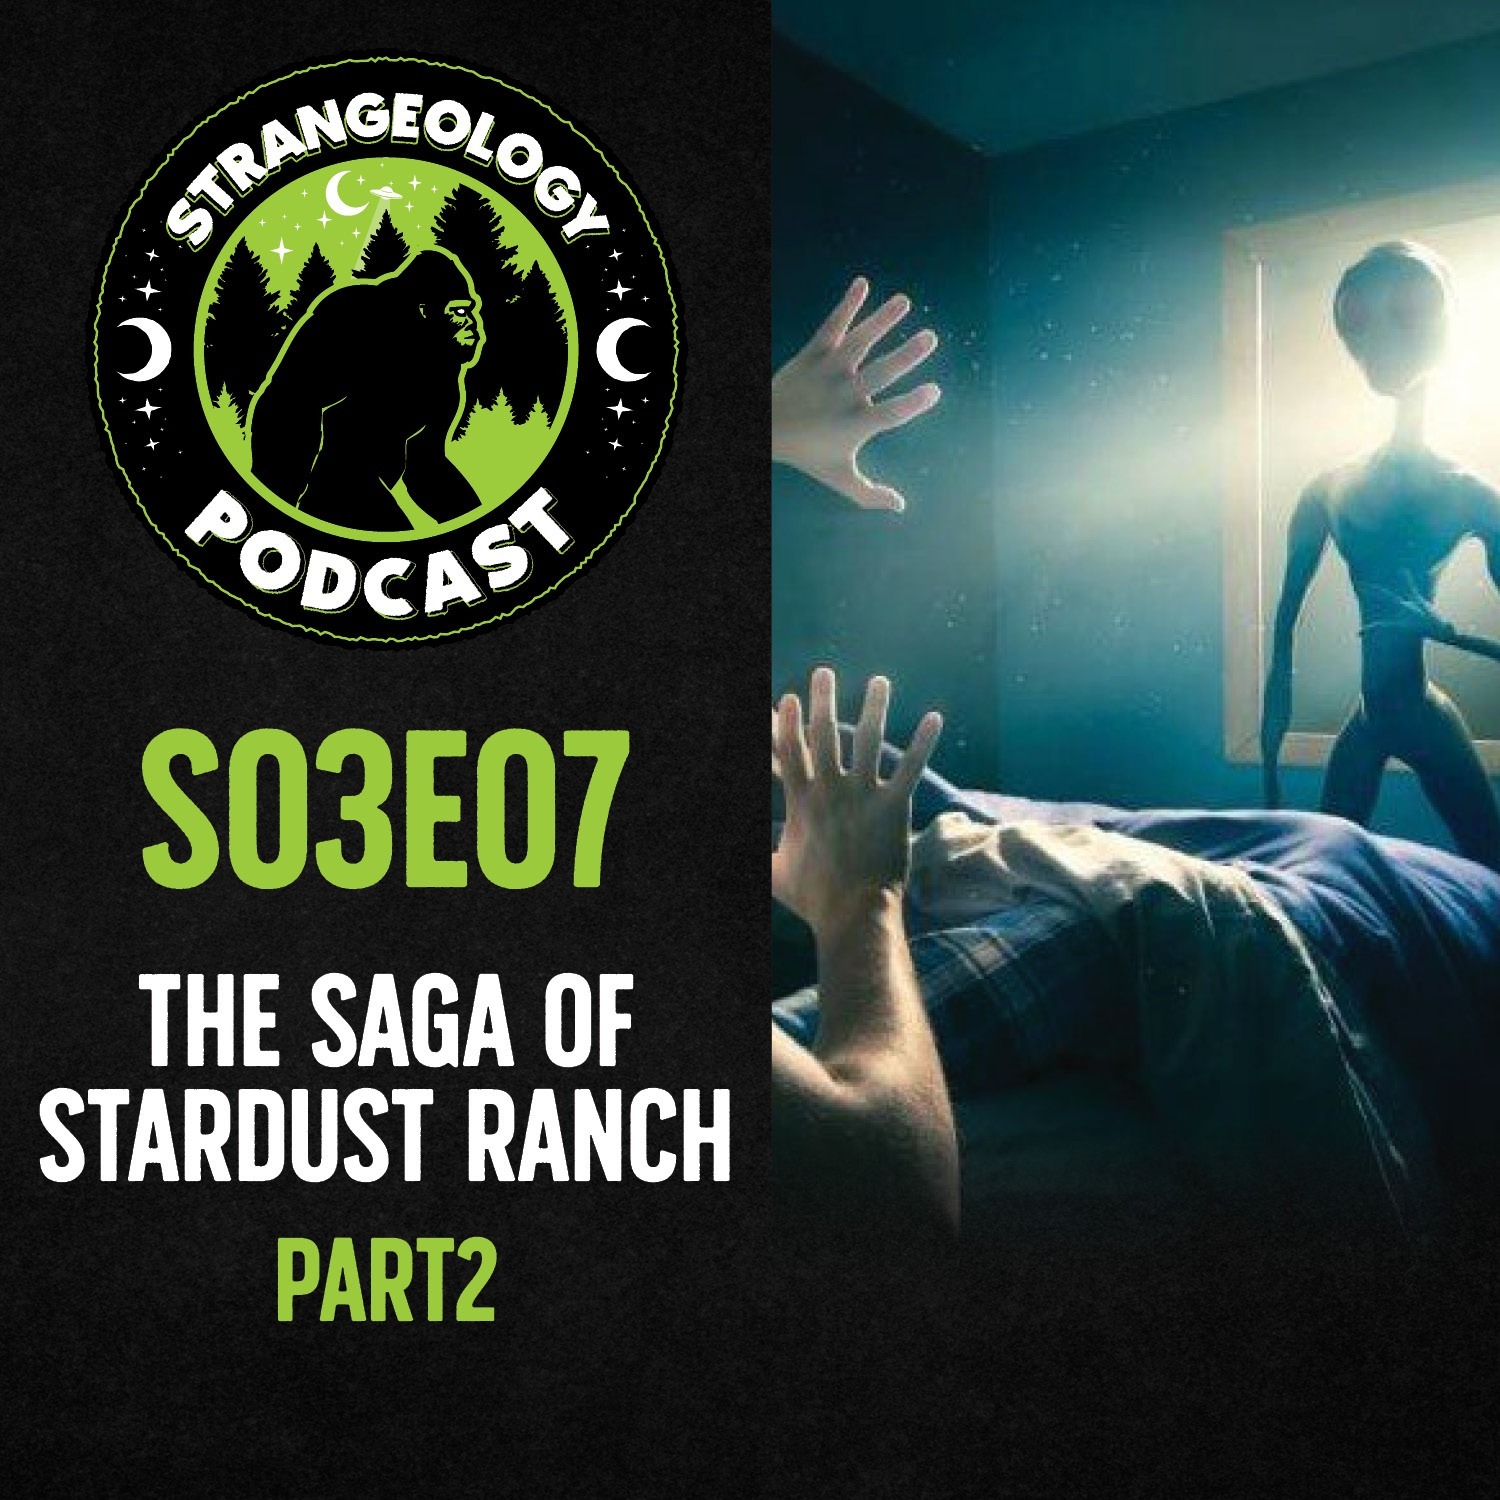 The Saga of Stardust Ranch (Part 2)